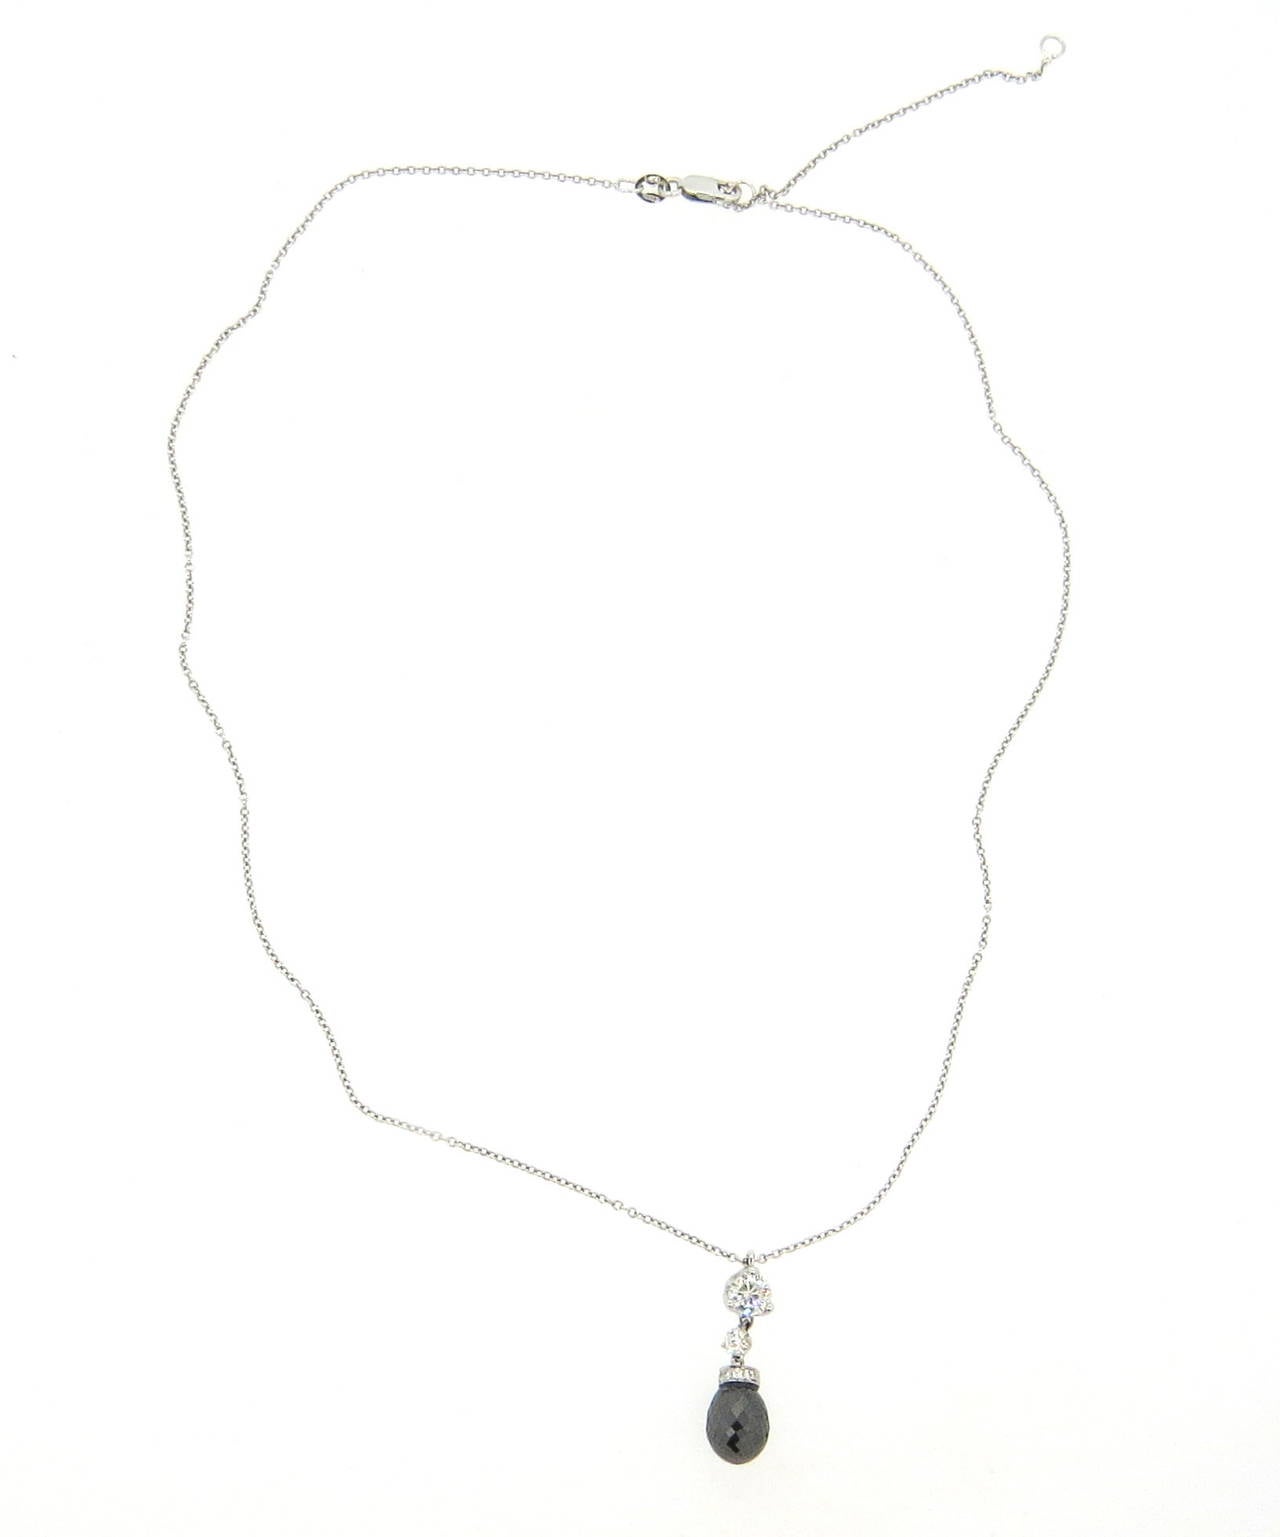 18k white gold chain necklace, crafted by Roberto Coin, featuring white and black briolette diamond pendant. Necklace is 18